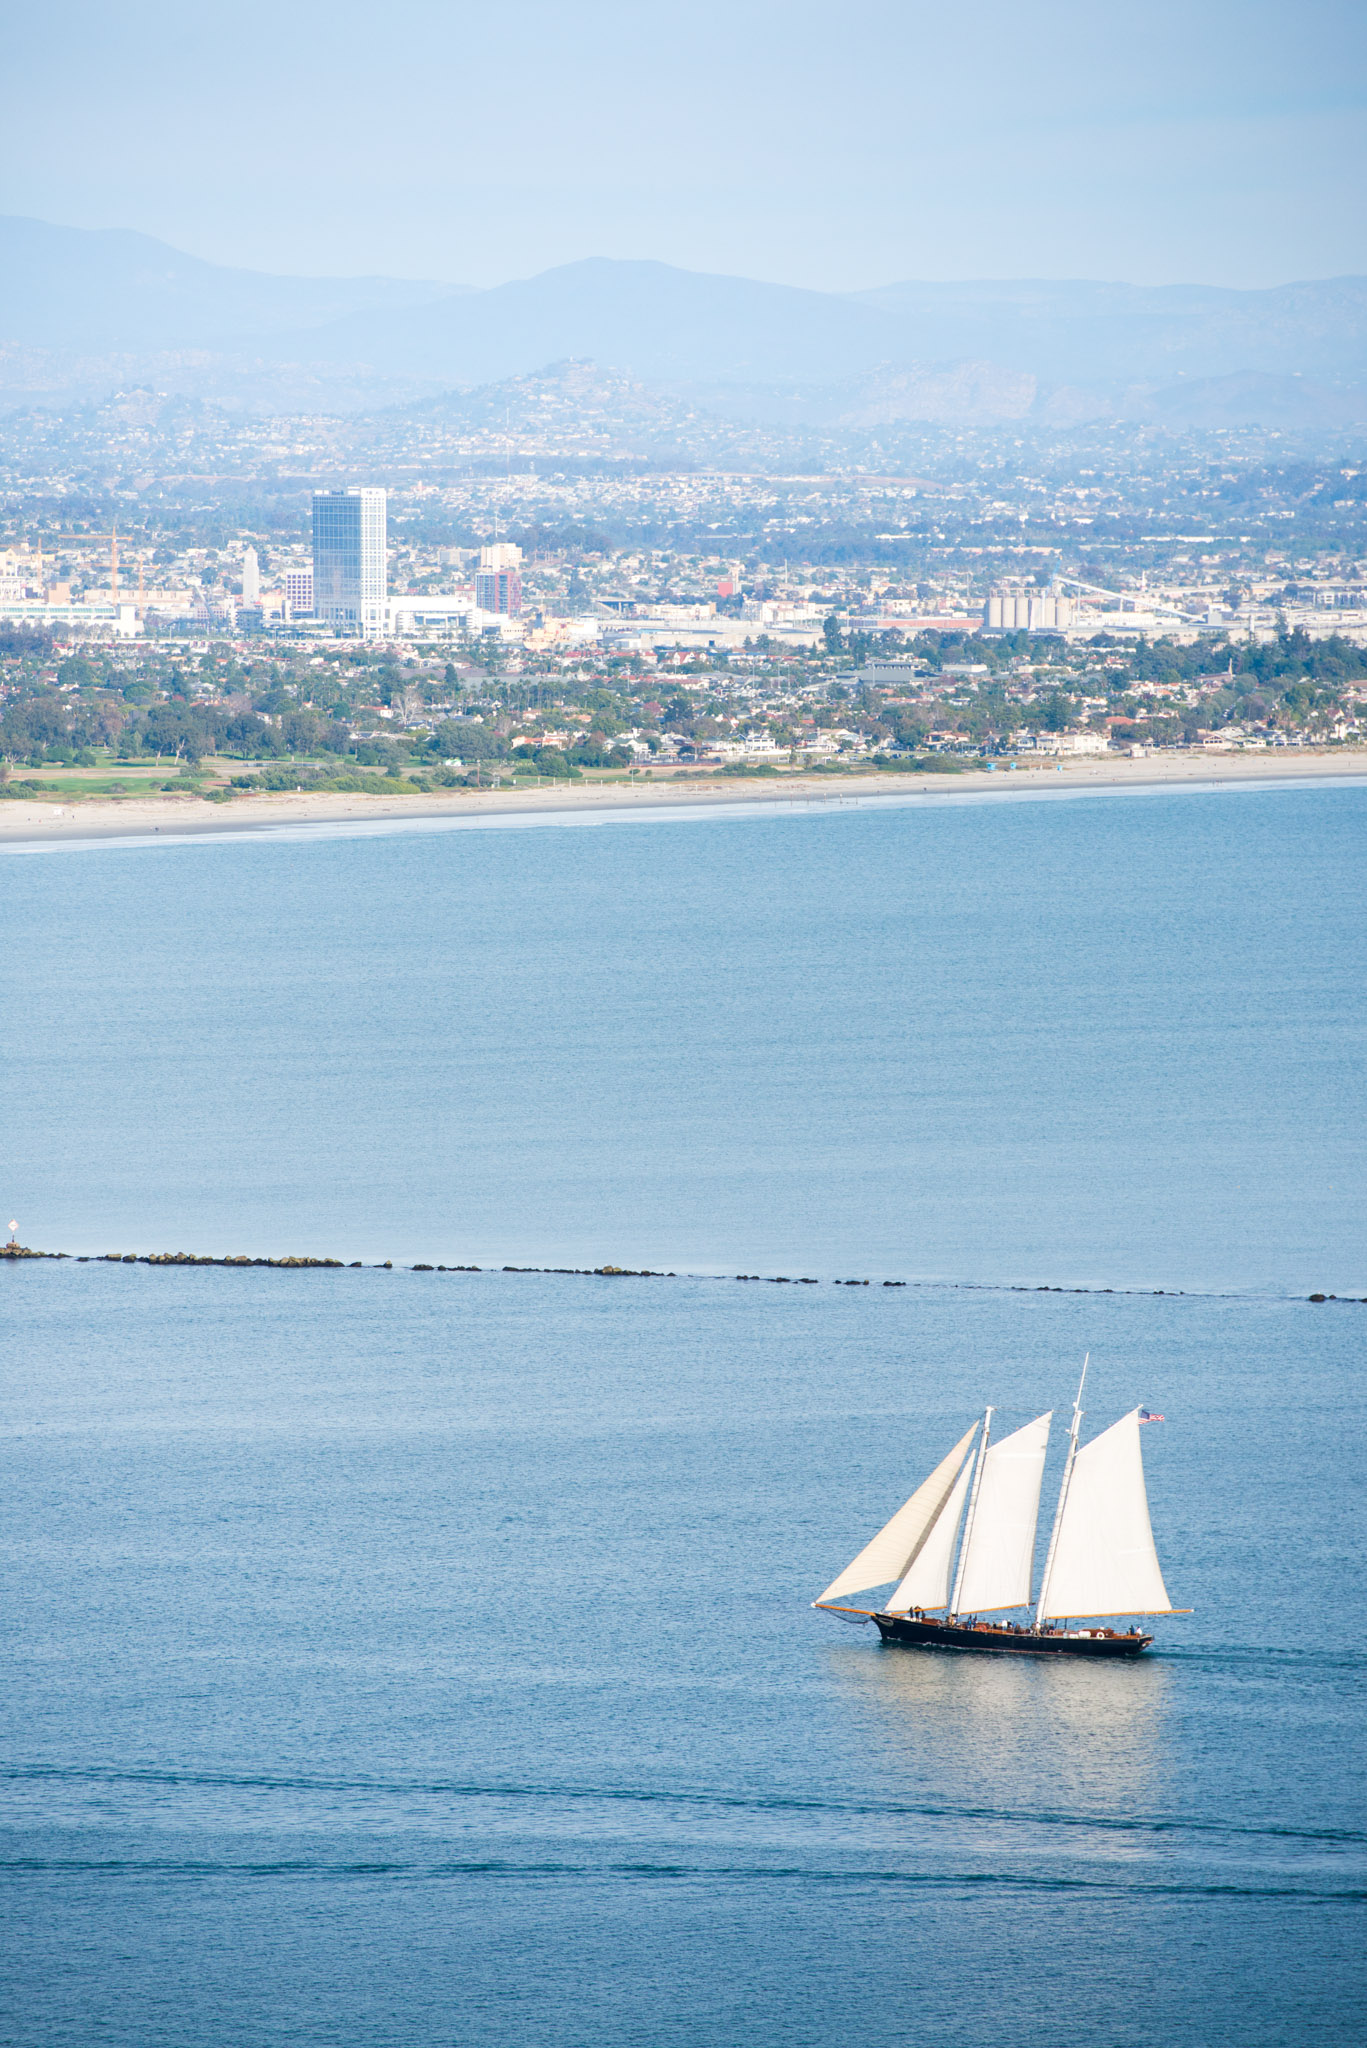 The view of San Diego Bay from Cabrillo National Monument